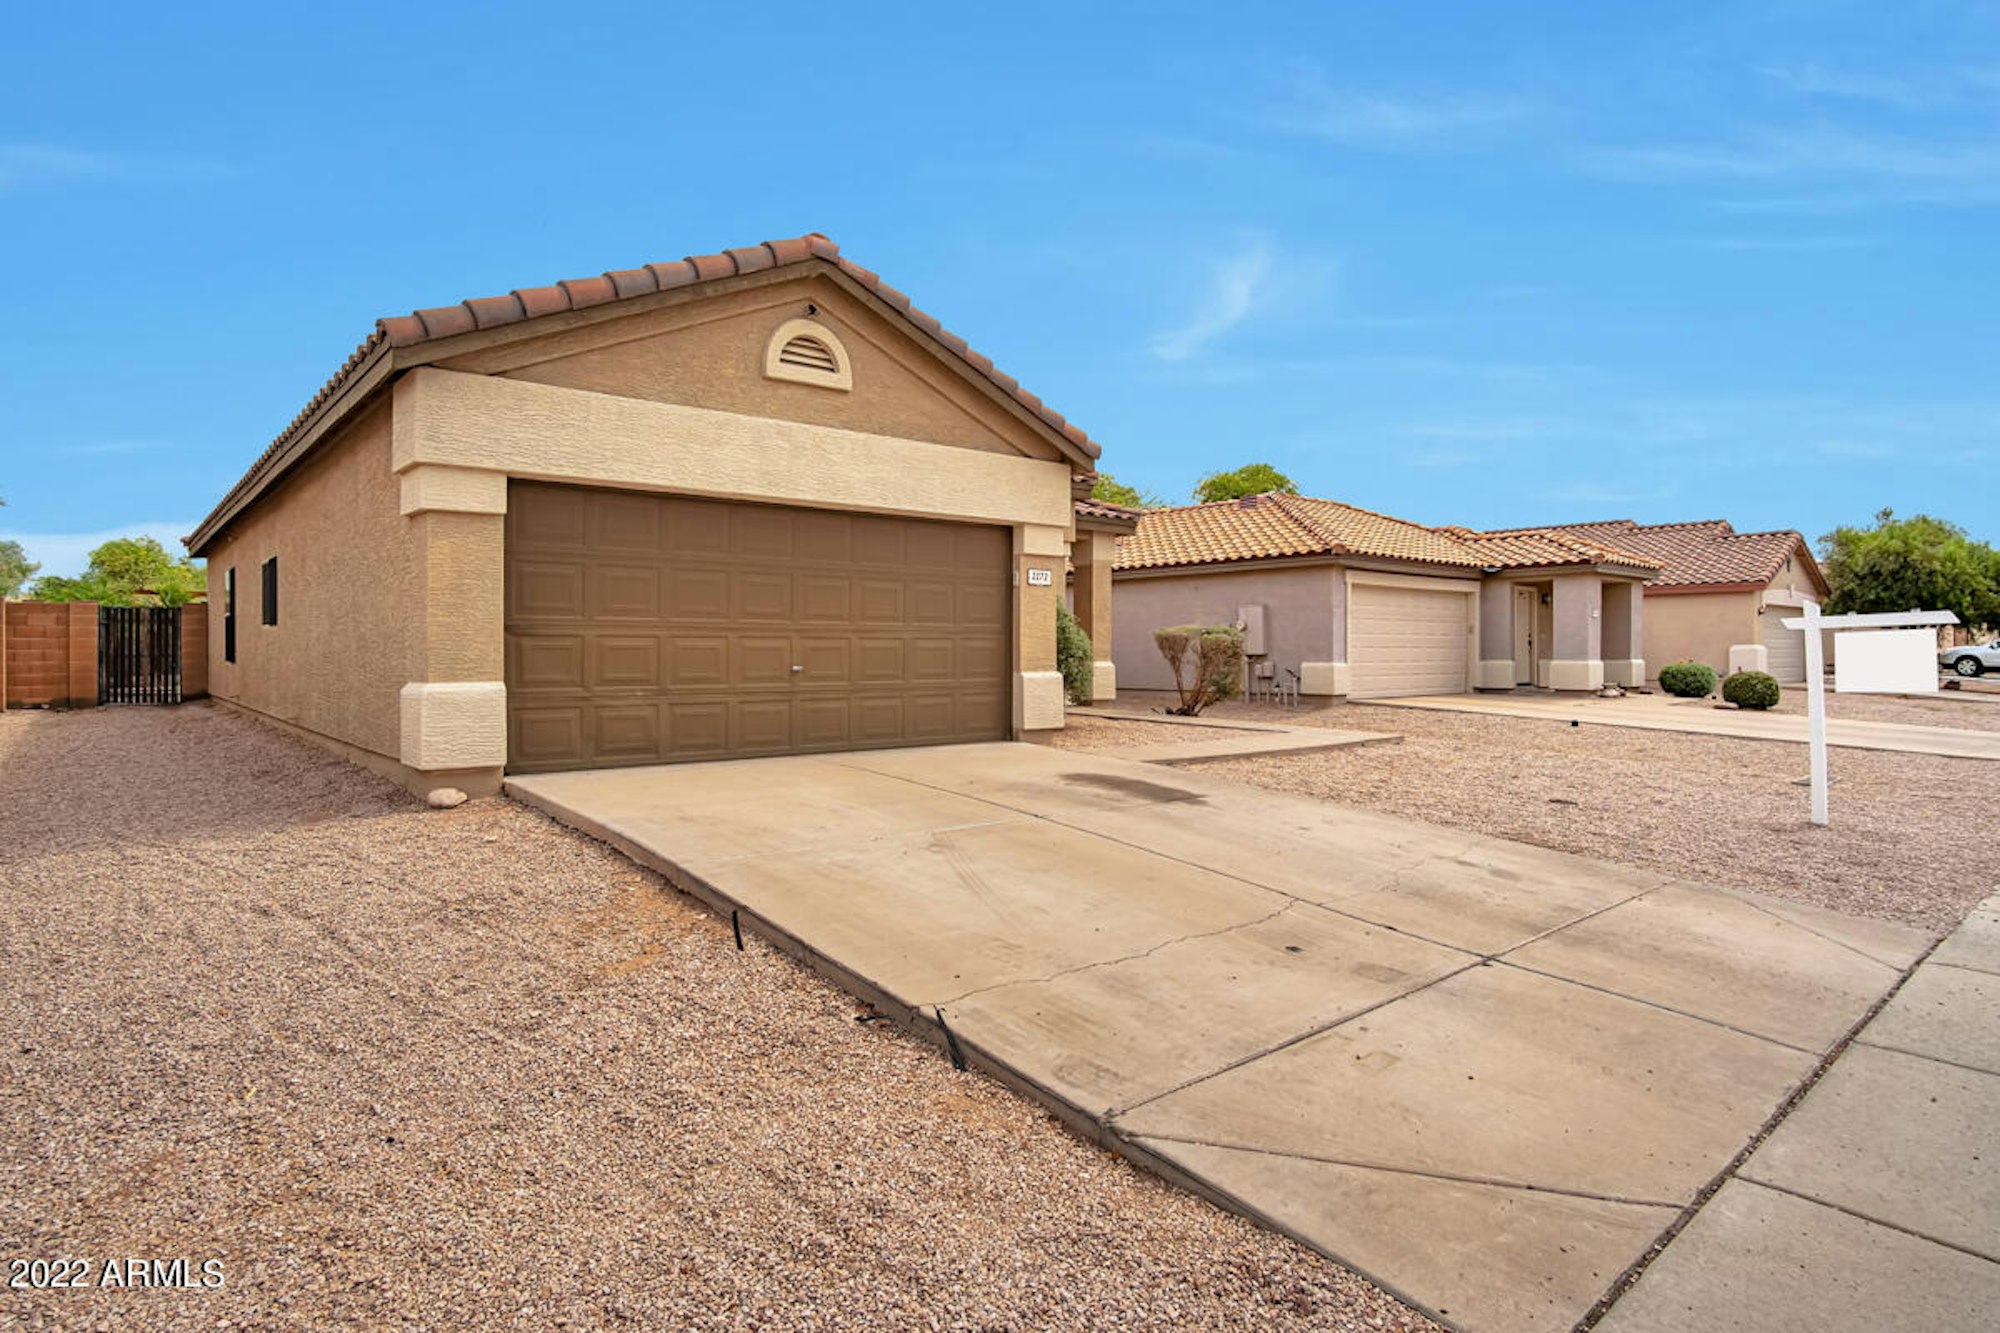 Photo 1 of 15 - 2272 W 22nd Ave, Apache Junction, AZ 85120